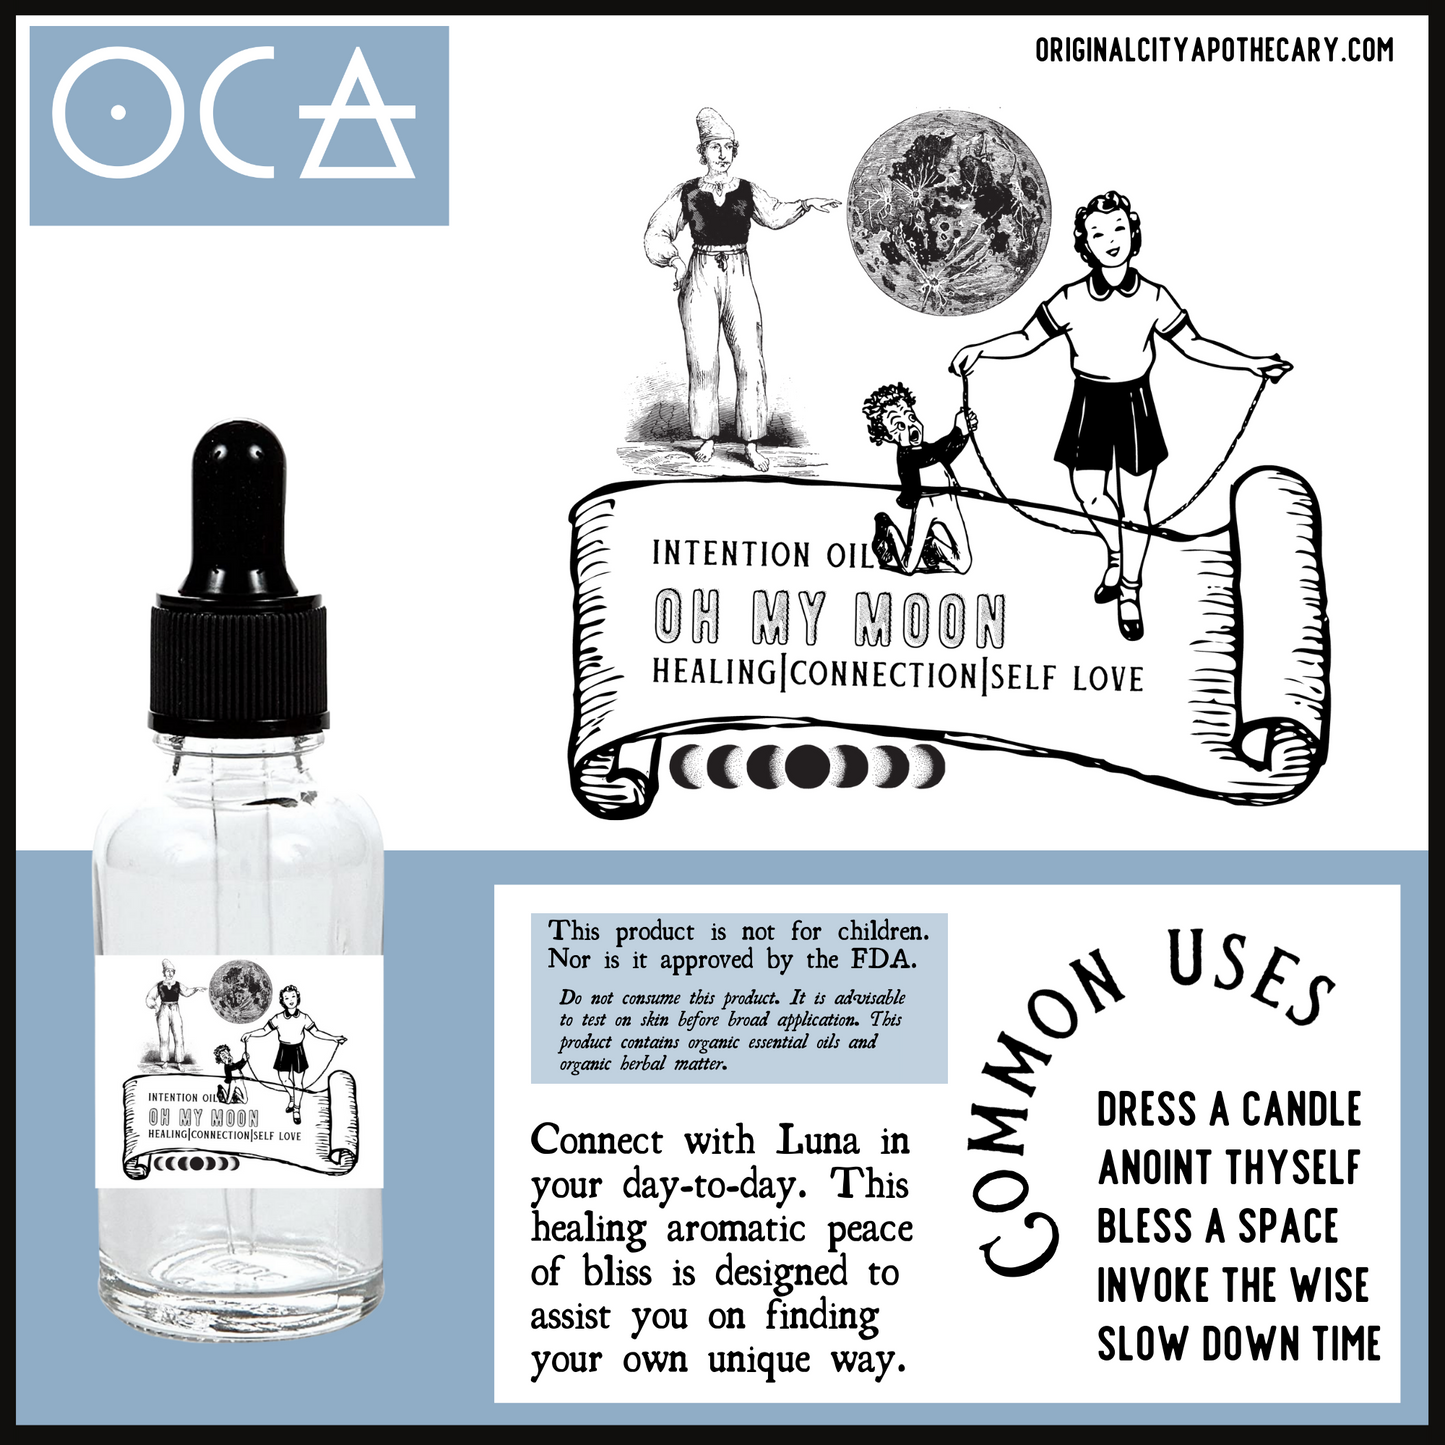 Oh My Moon (Herbal Perfume/Oil) - Original City Apothecary